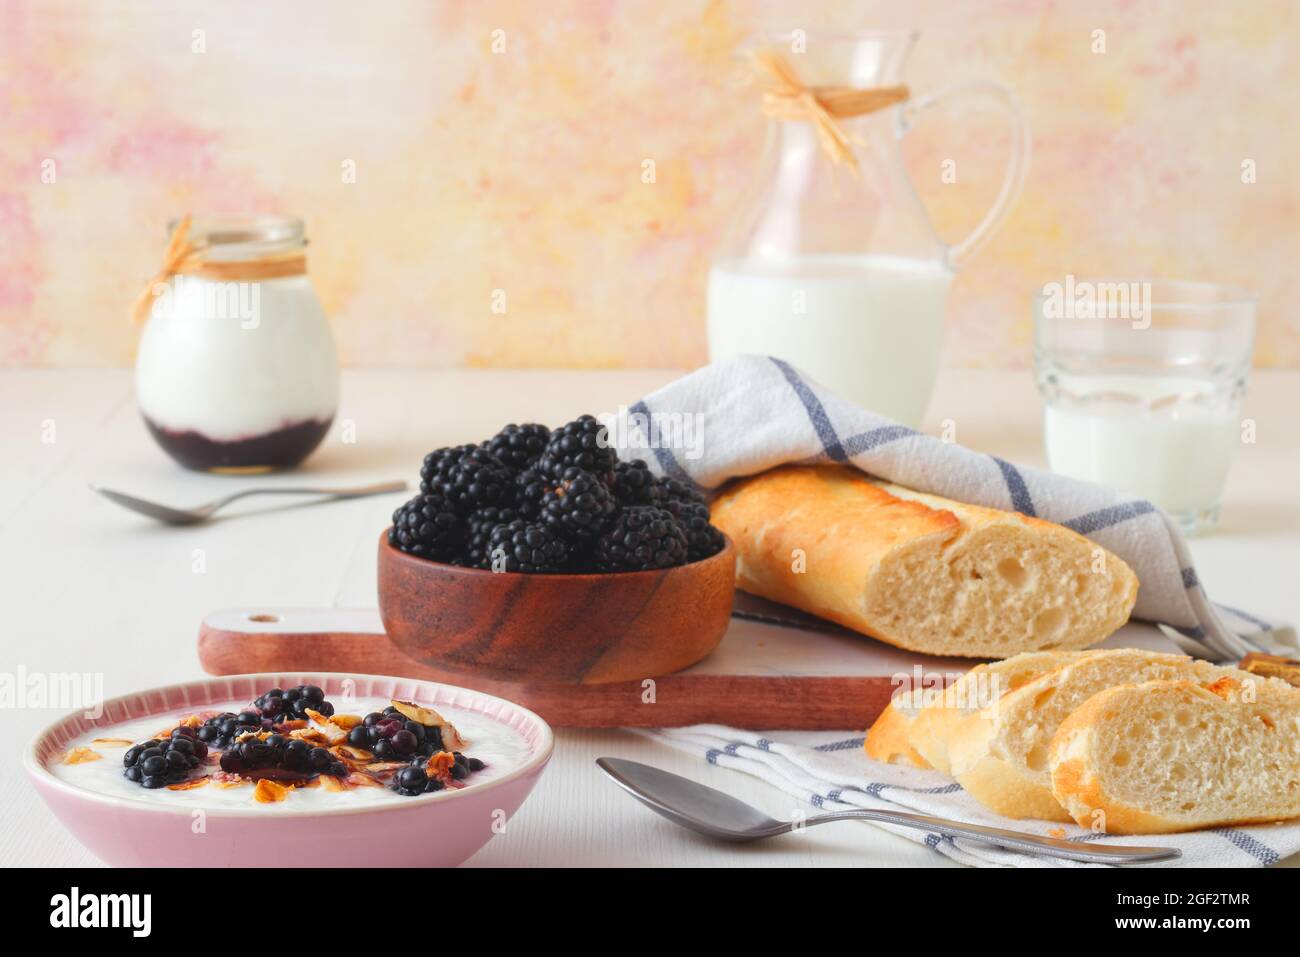 Bowl of blackberries, milk, yoghurt with oatmeals and bread, a table set for breakfast, ingredients from the local farmers market. Closeup, front view Stock Photo